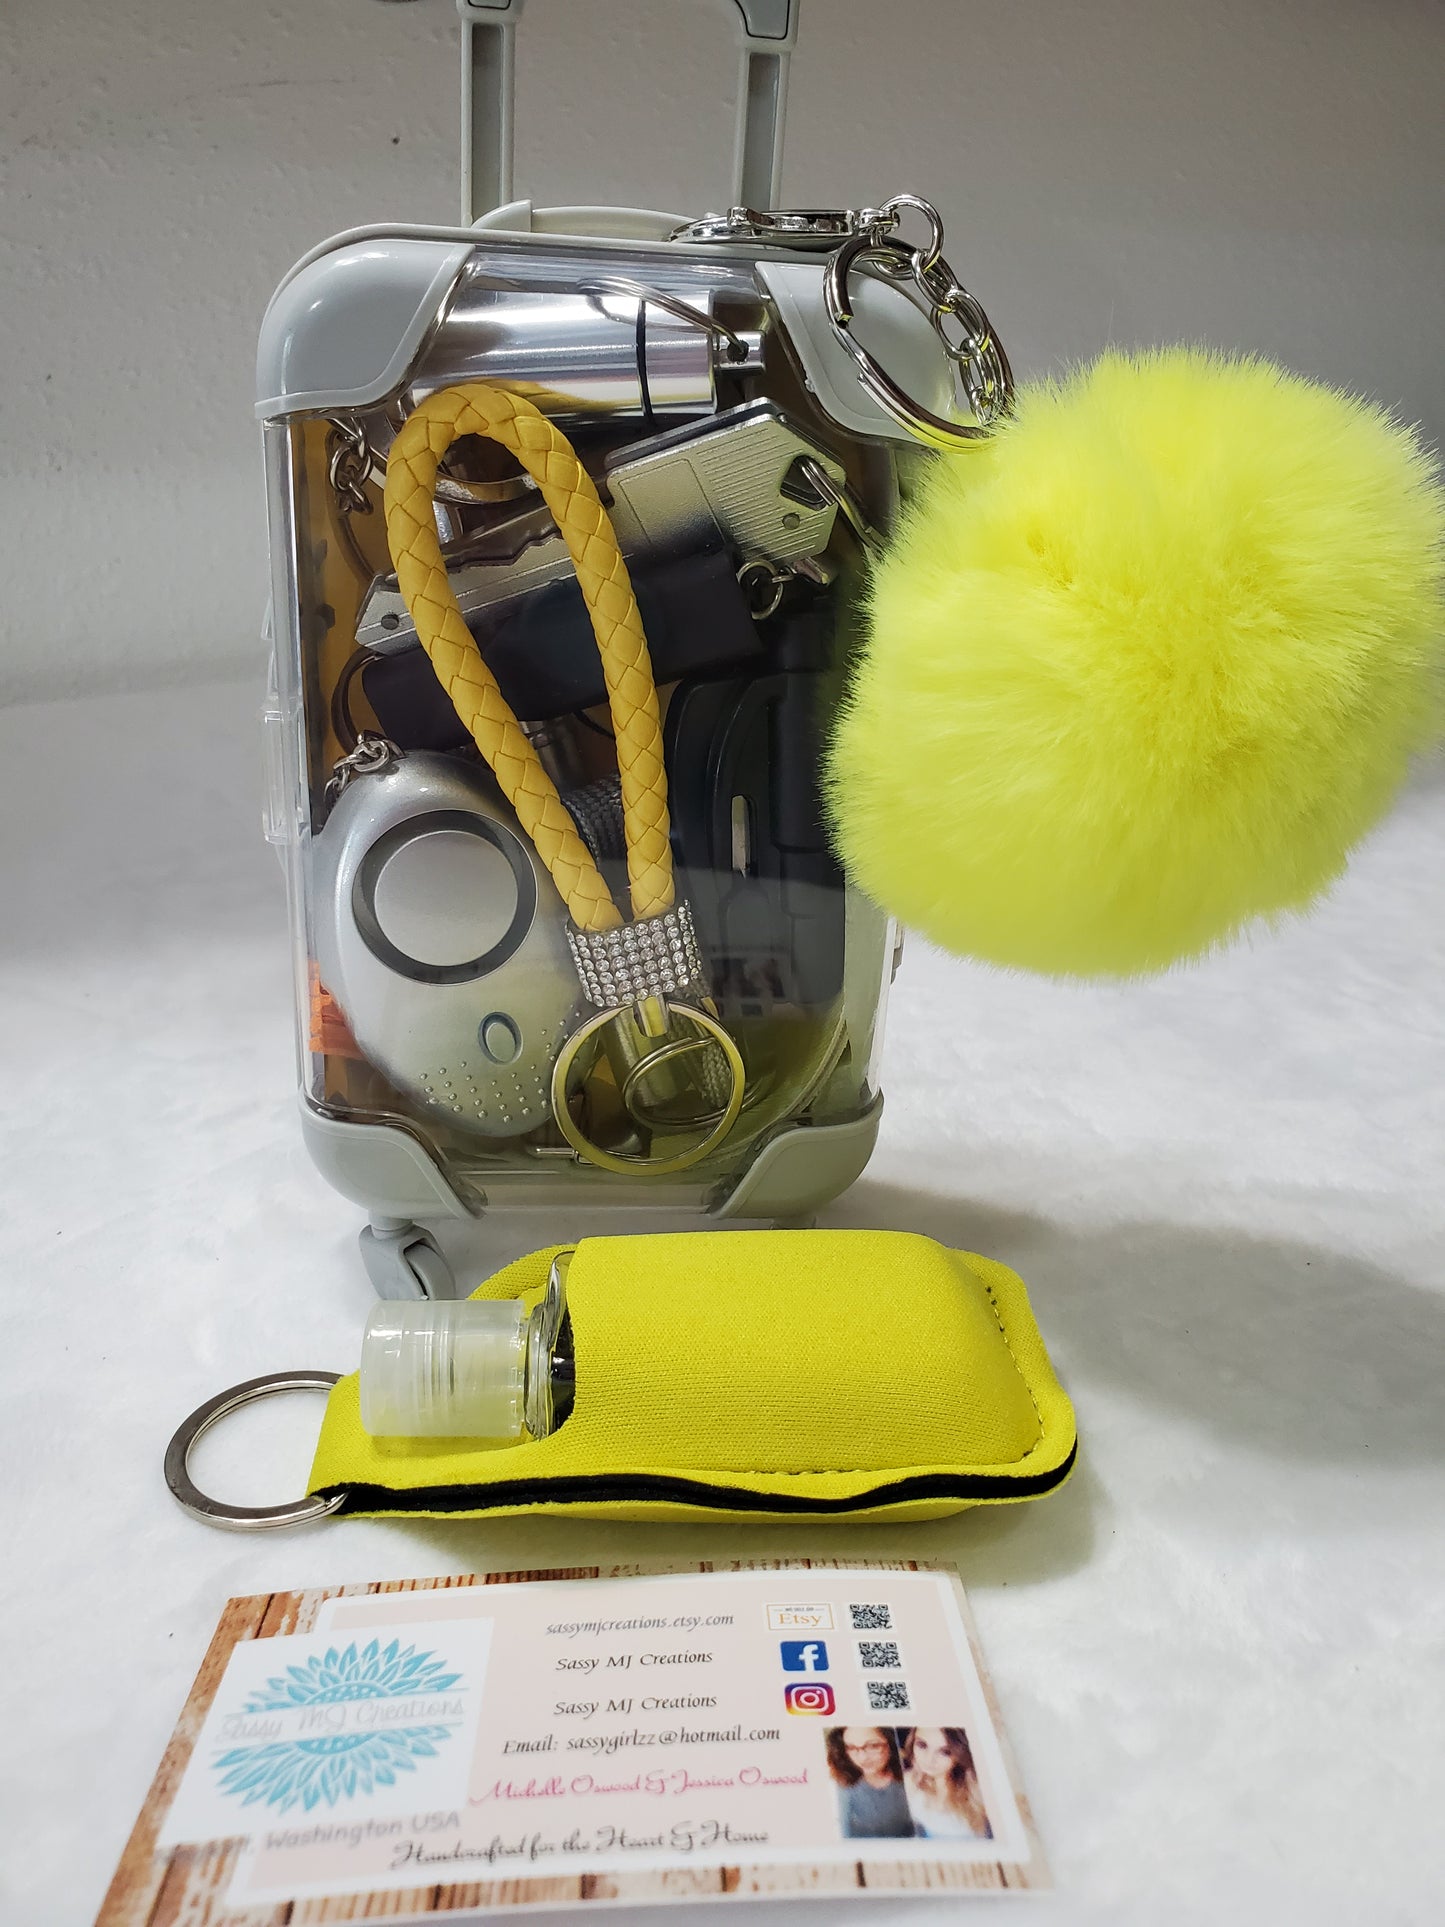 Lemon Yellow Safety Keychain Set-Personal Safety Kit with Mini Trolley Suitcase 17 pc.